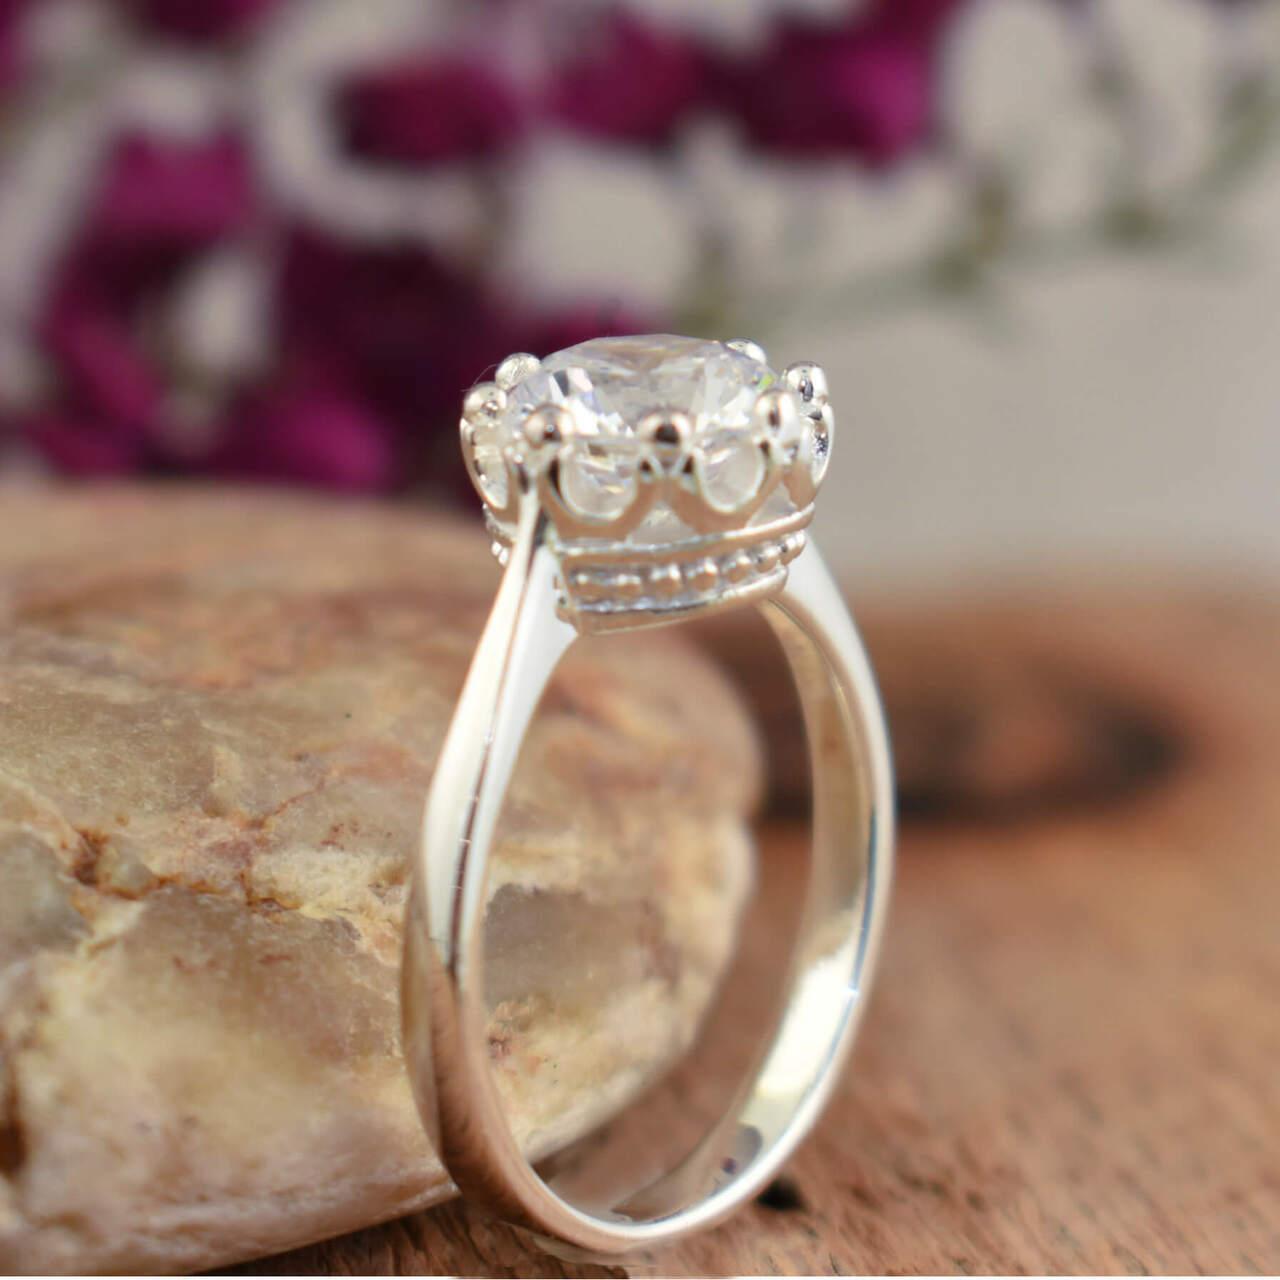 CZ centered ring with a crown setting